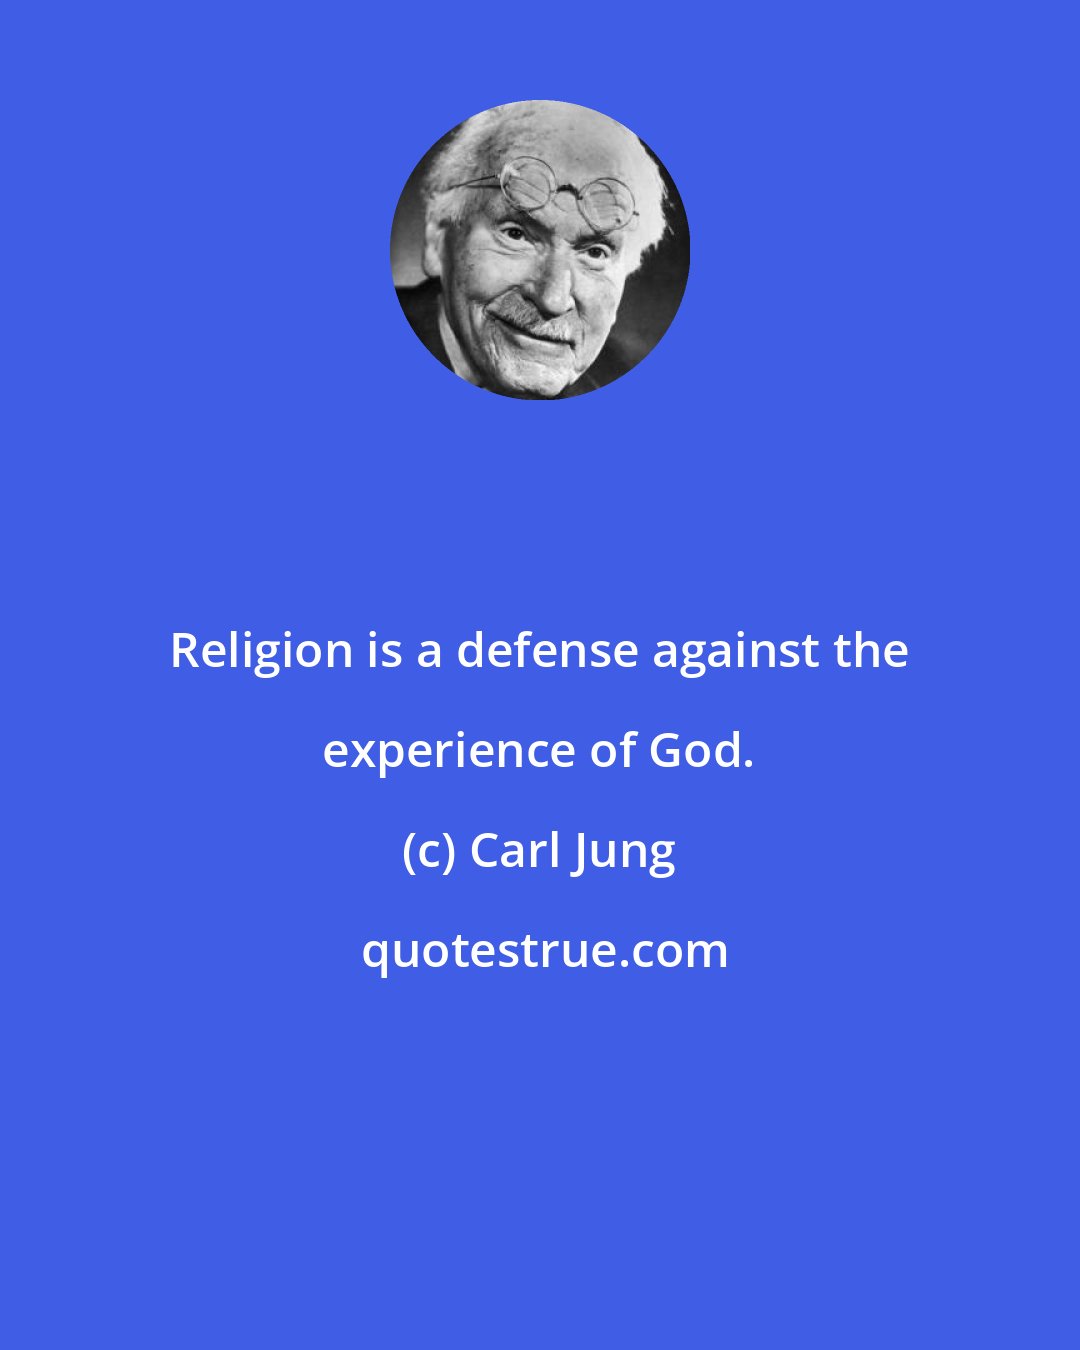 Carl Jung: Religion is a defense against the experience of God.